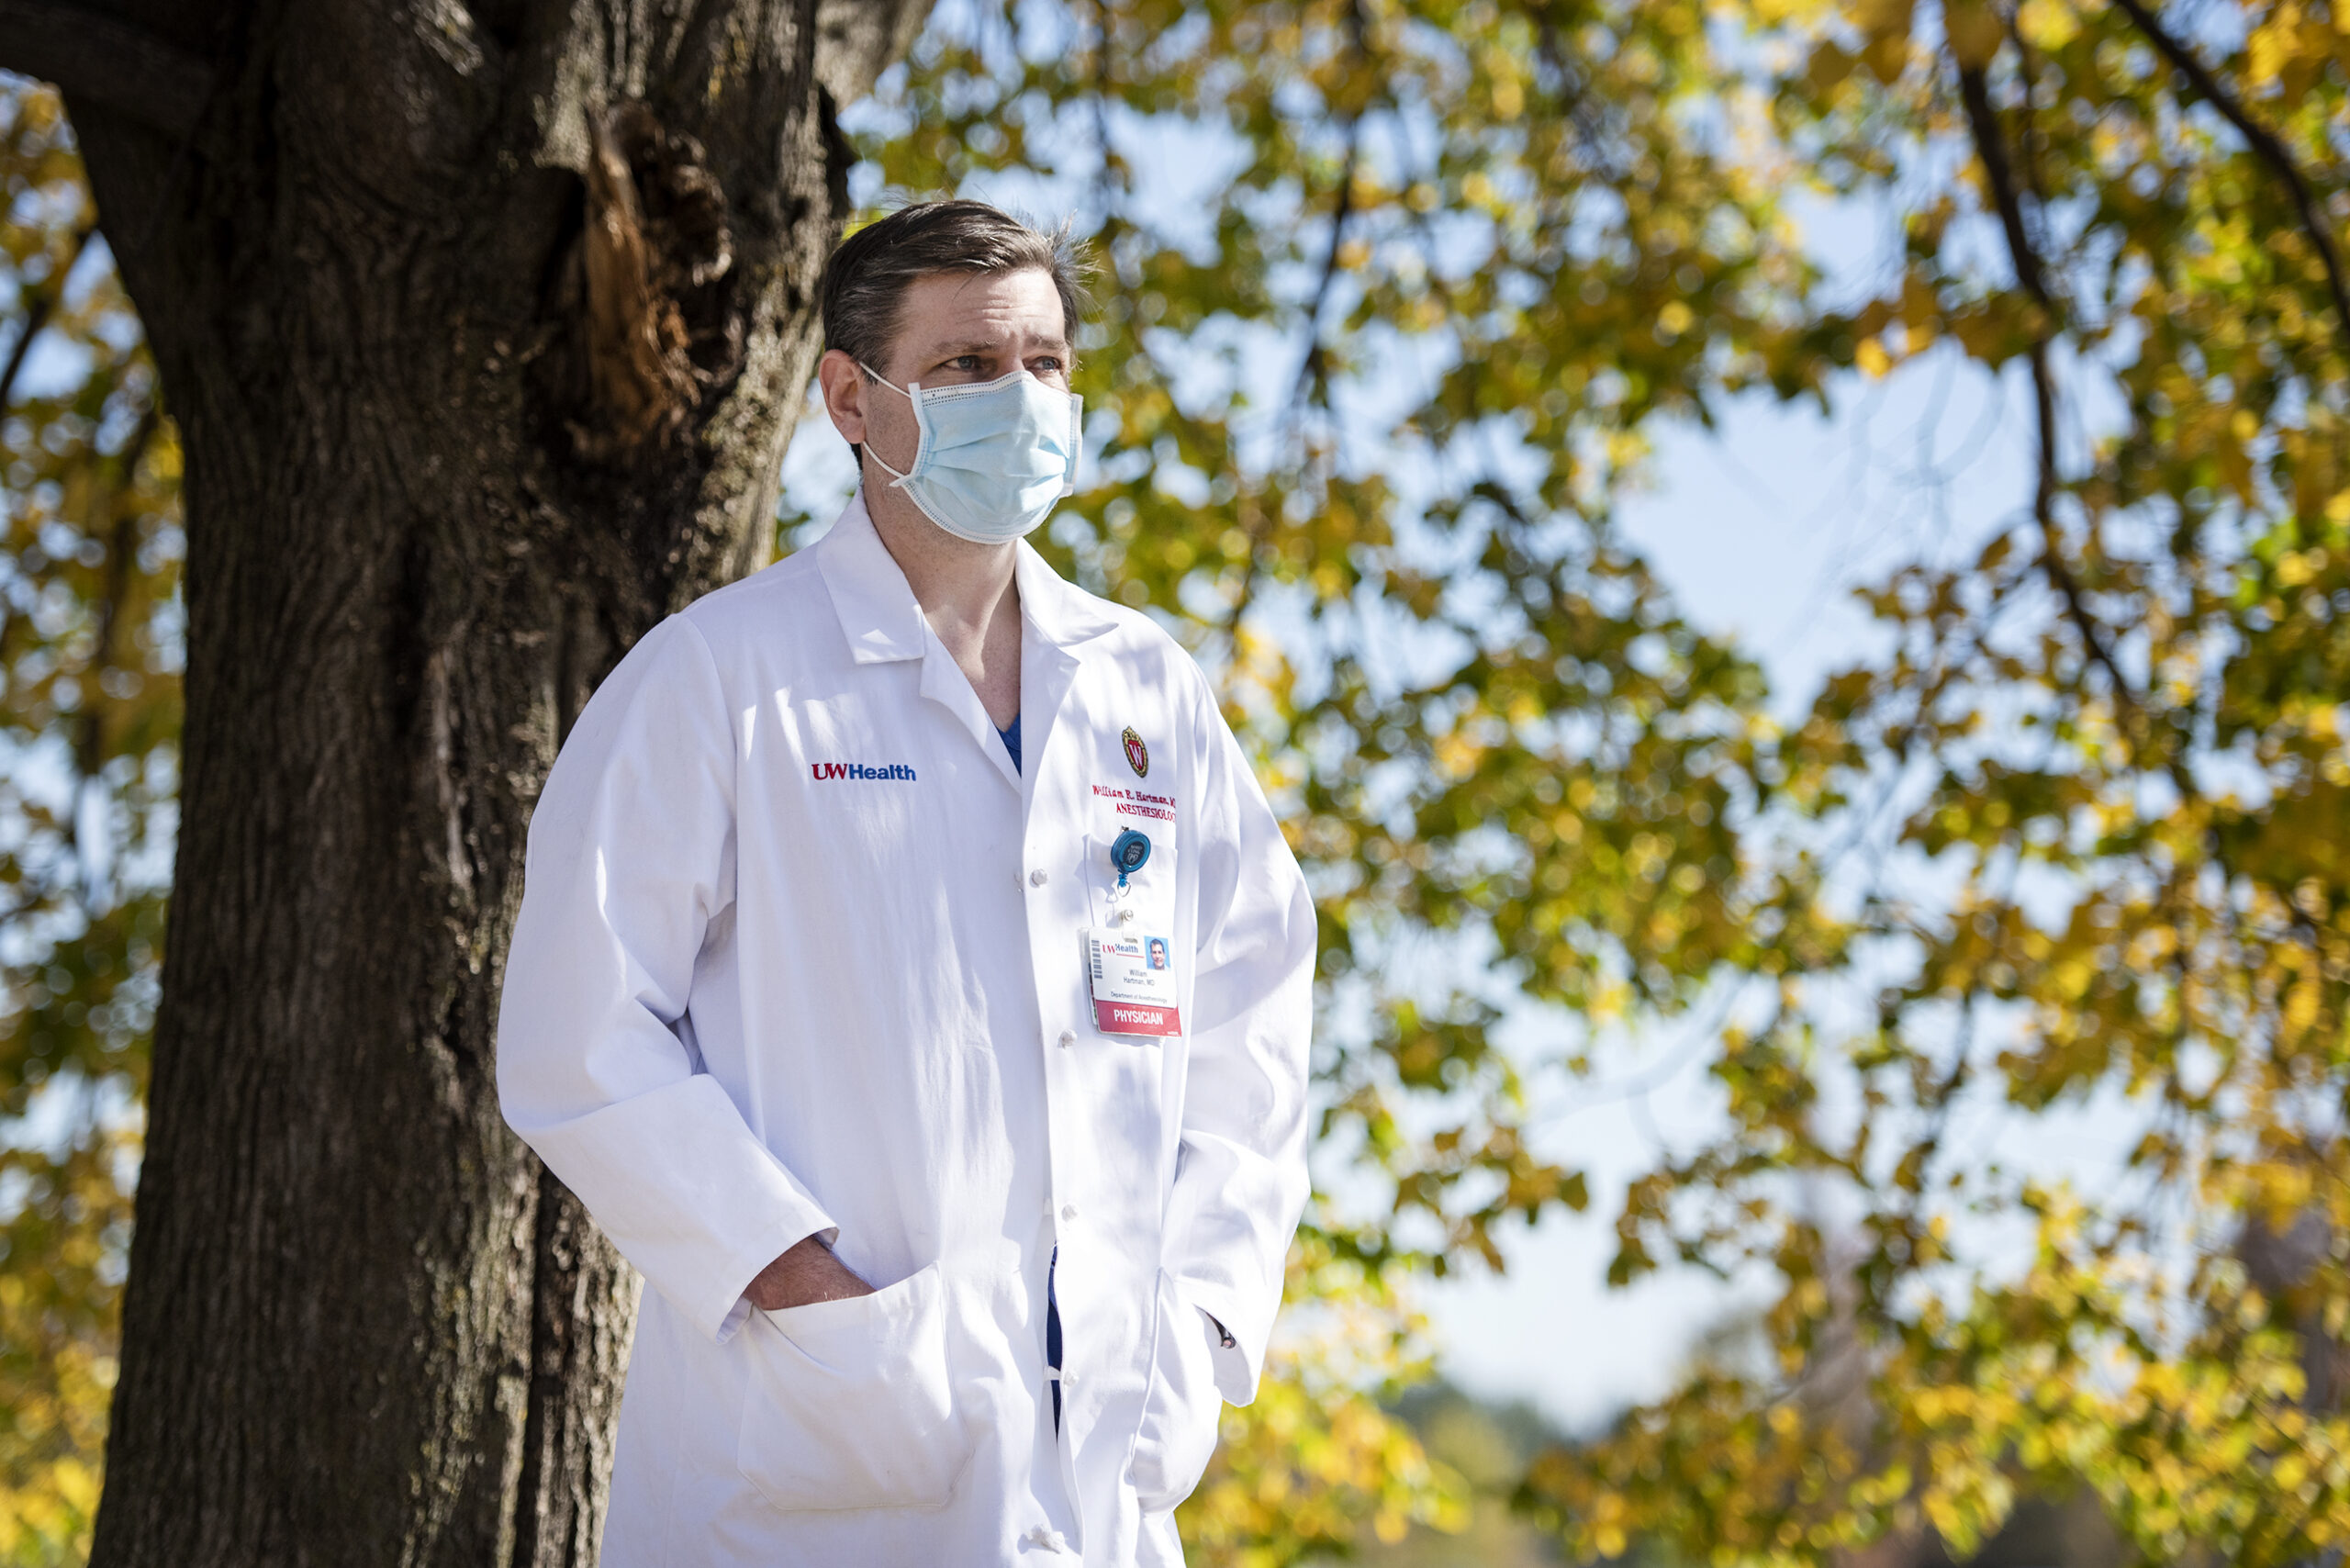 A doctor in a white coat and face mask stands in front of a tree with yellow fall leaves